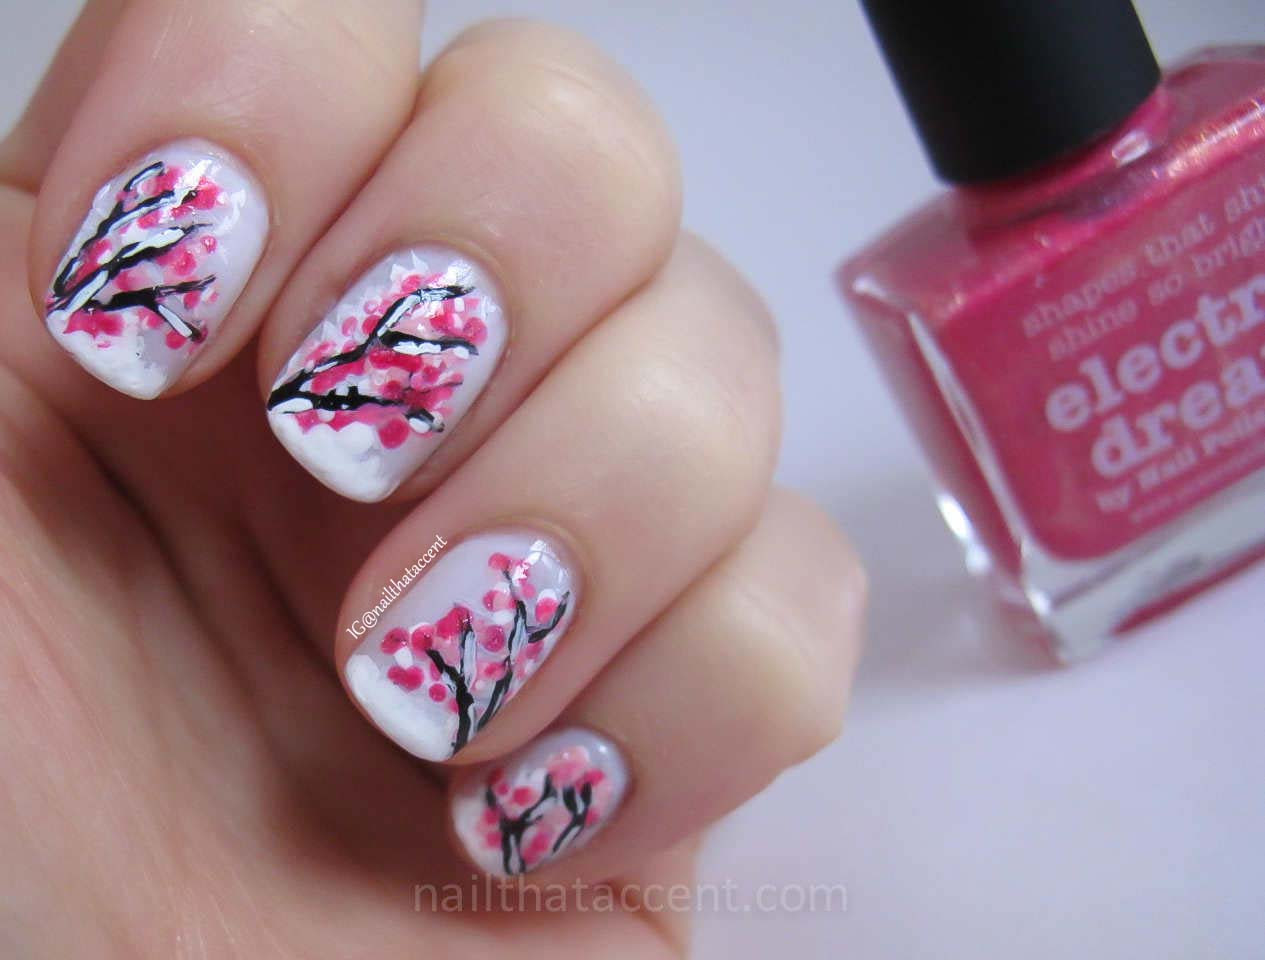 Cherry Blossom Nail Art
 Cherry Blossom Nail Art nail that accent